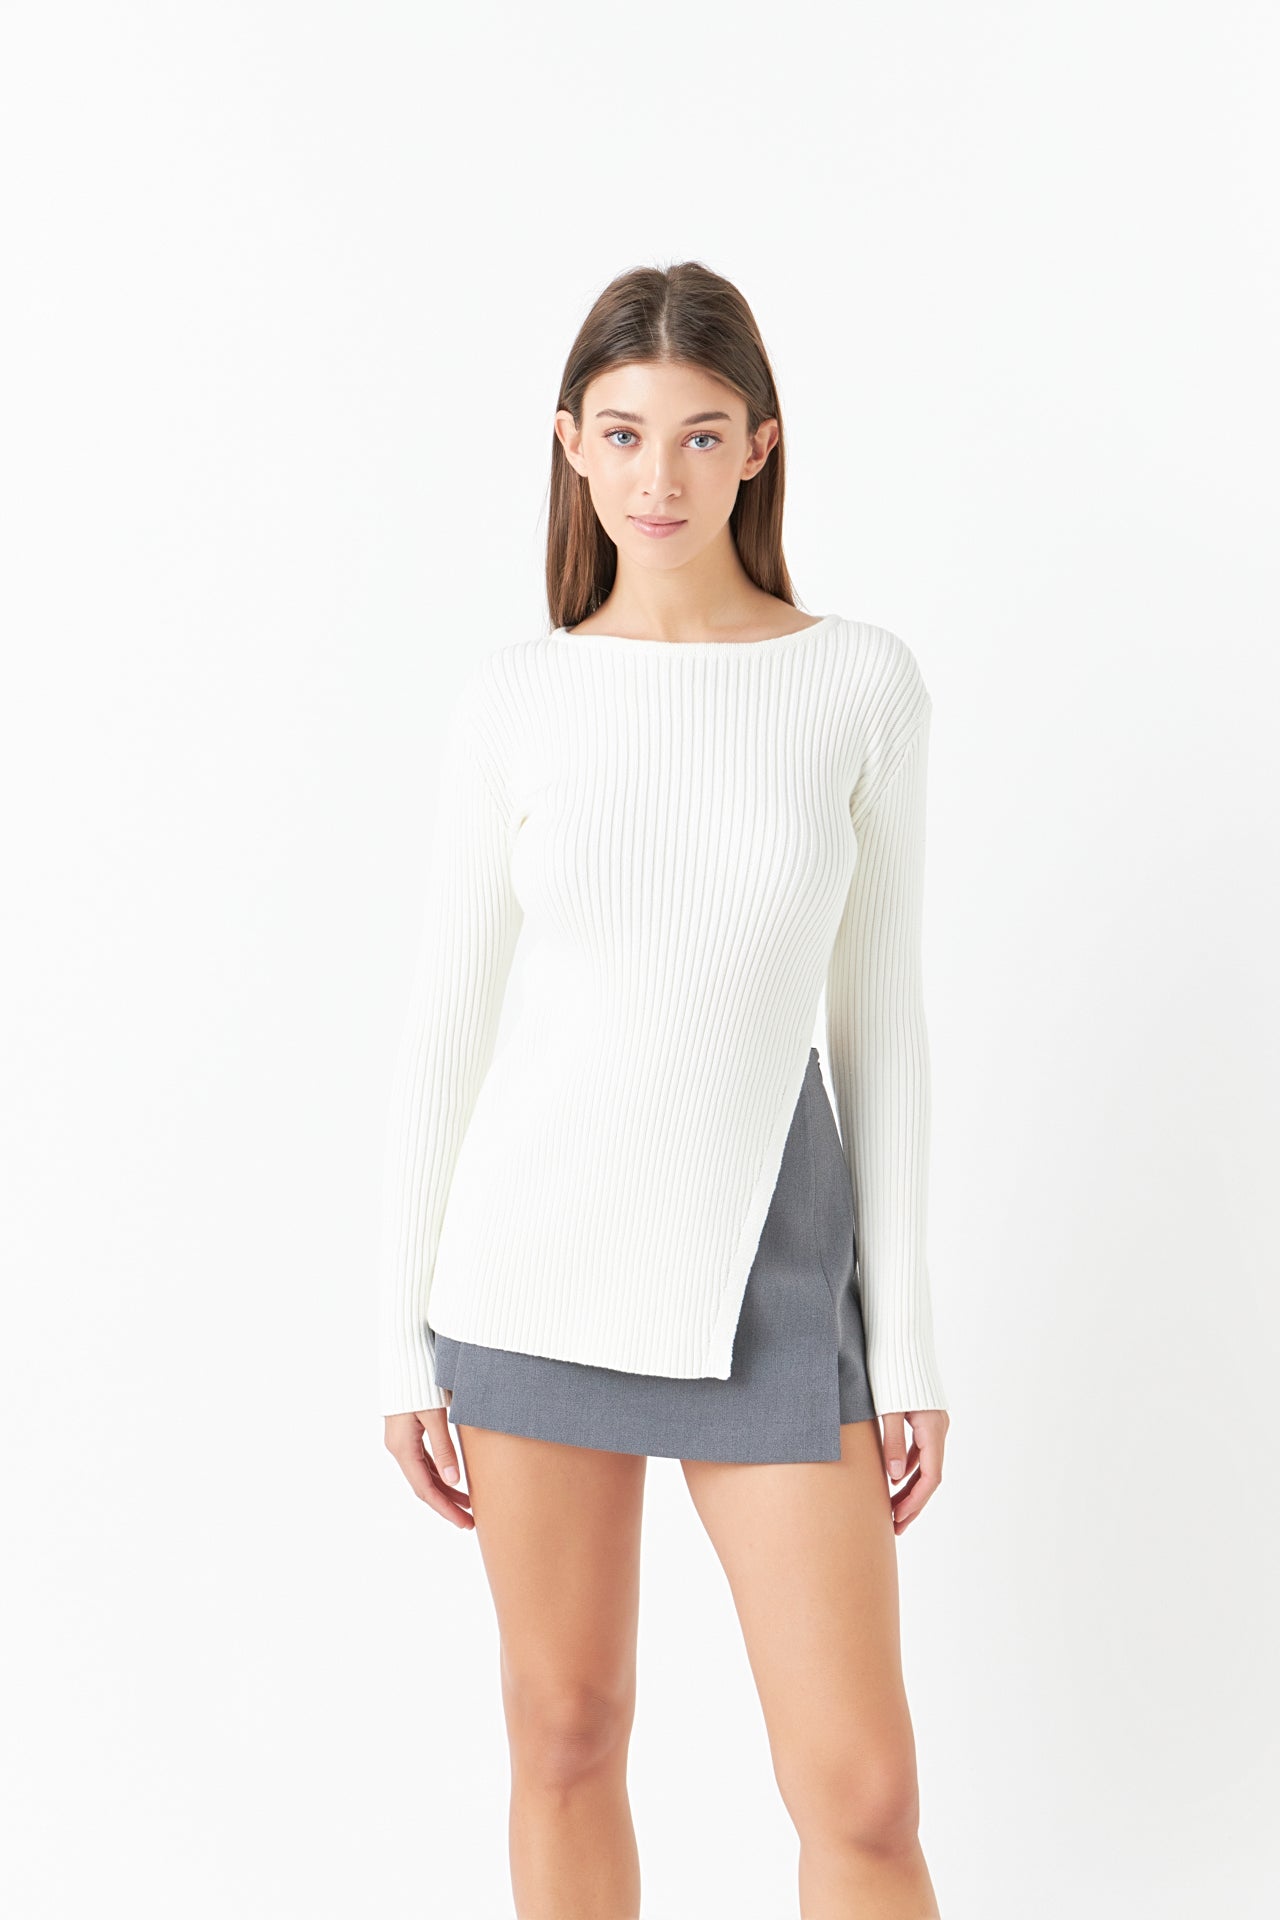 ENDLESS ROSE - Asymmetric Knit Top - TOPS available at Objectrare